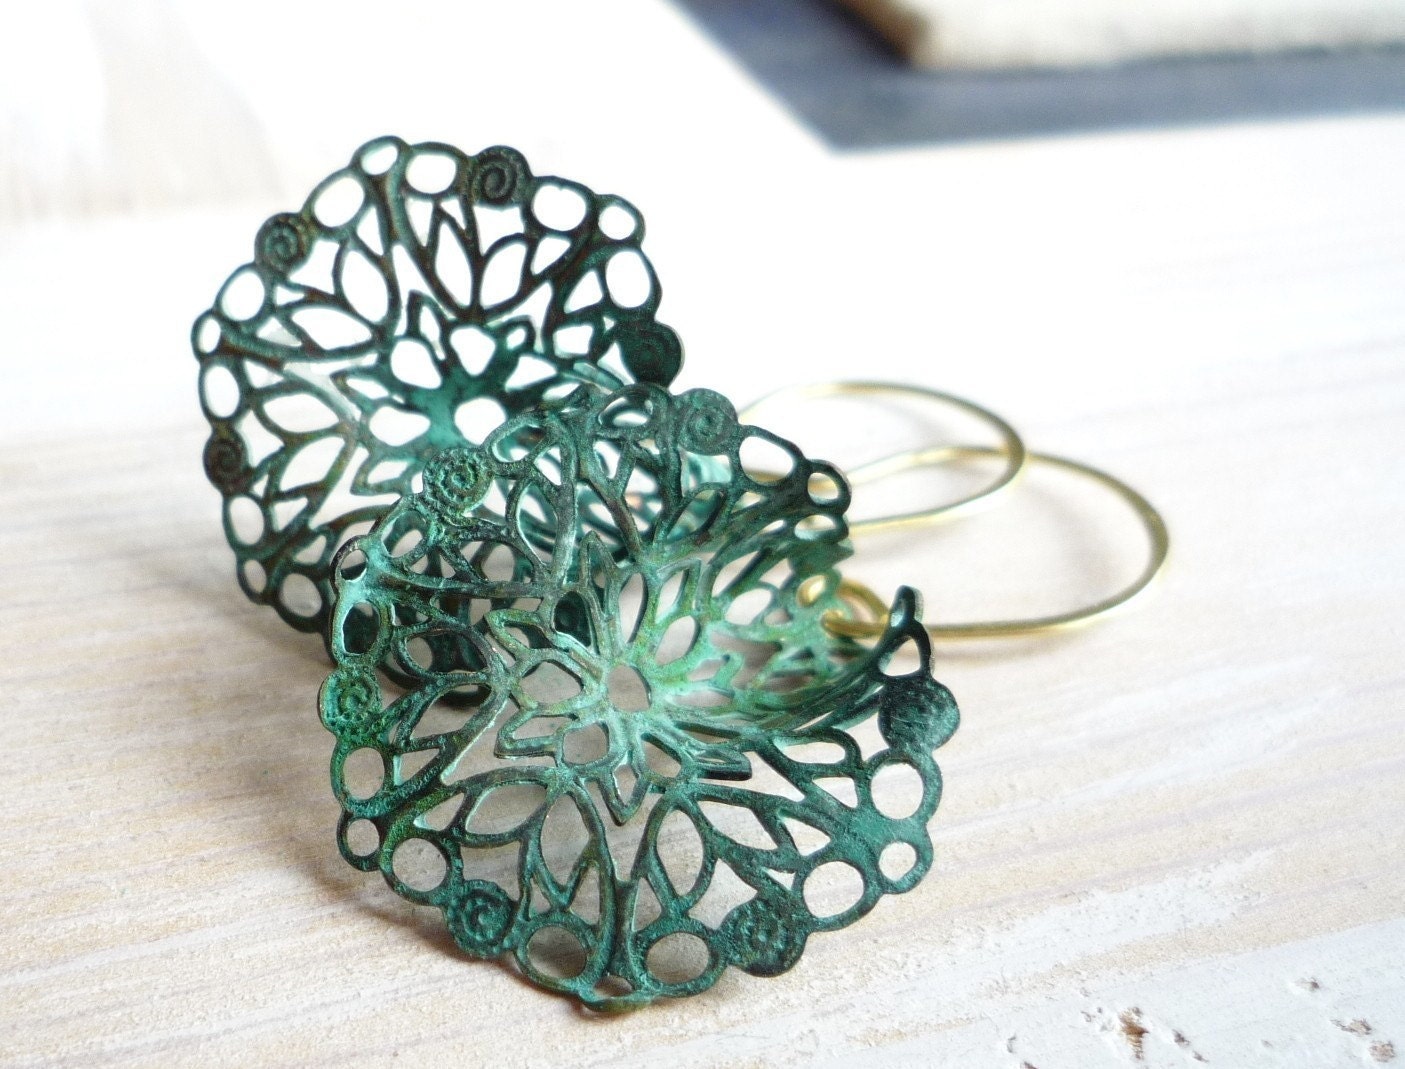 Verdigris lacy lily earrings - zsb creations